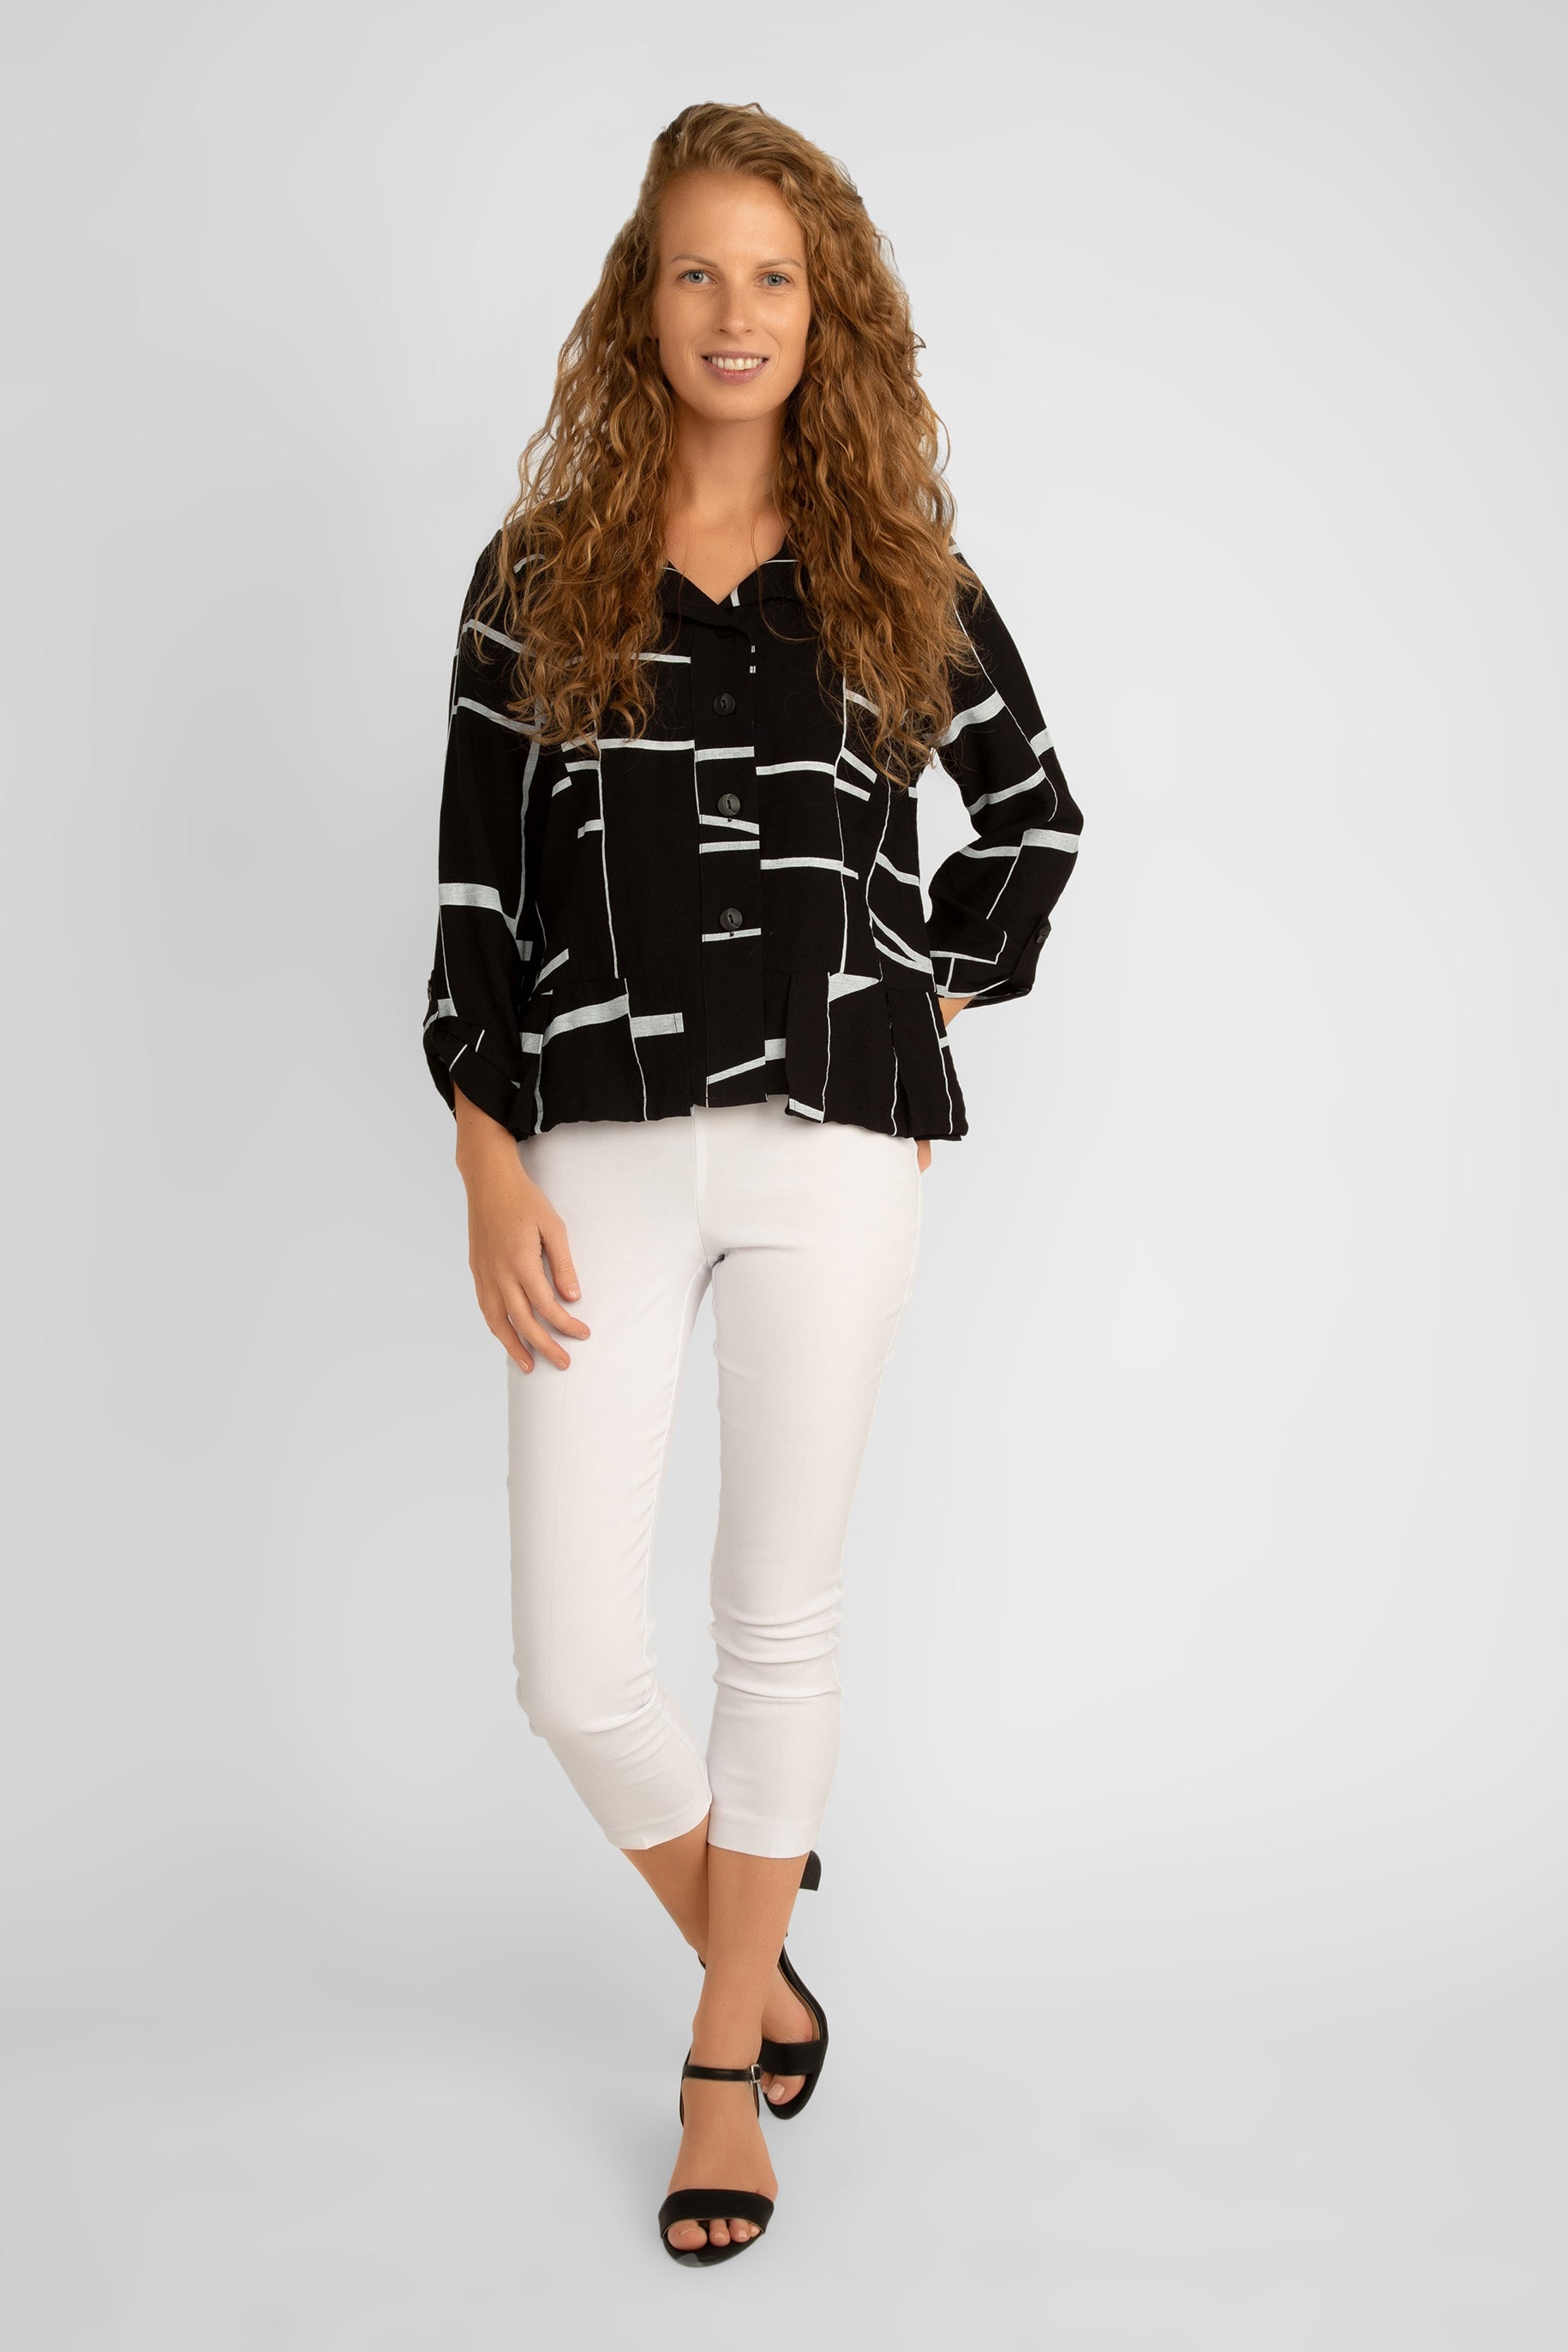 Picadilly (JM565QO) Women's Long Sleeve Black & White Button Up Rayon Jacket